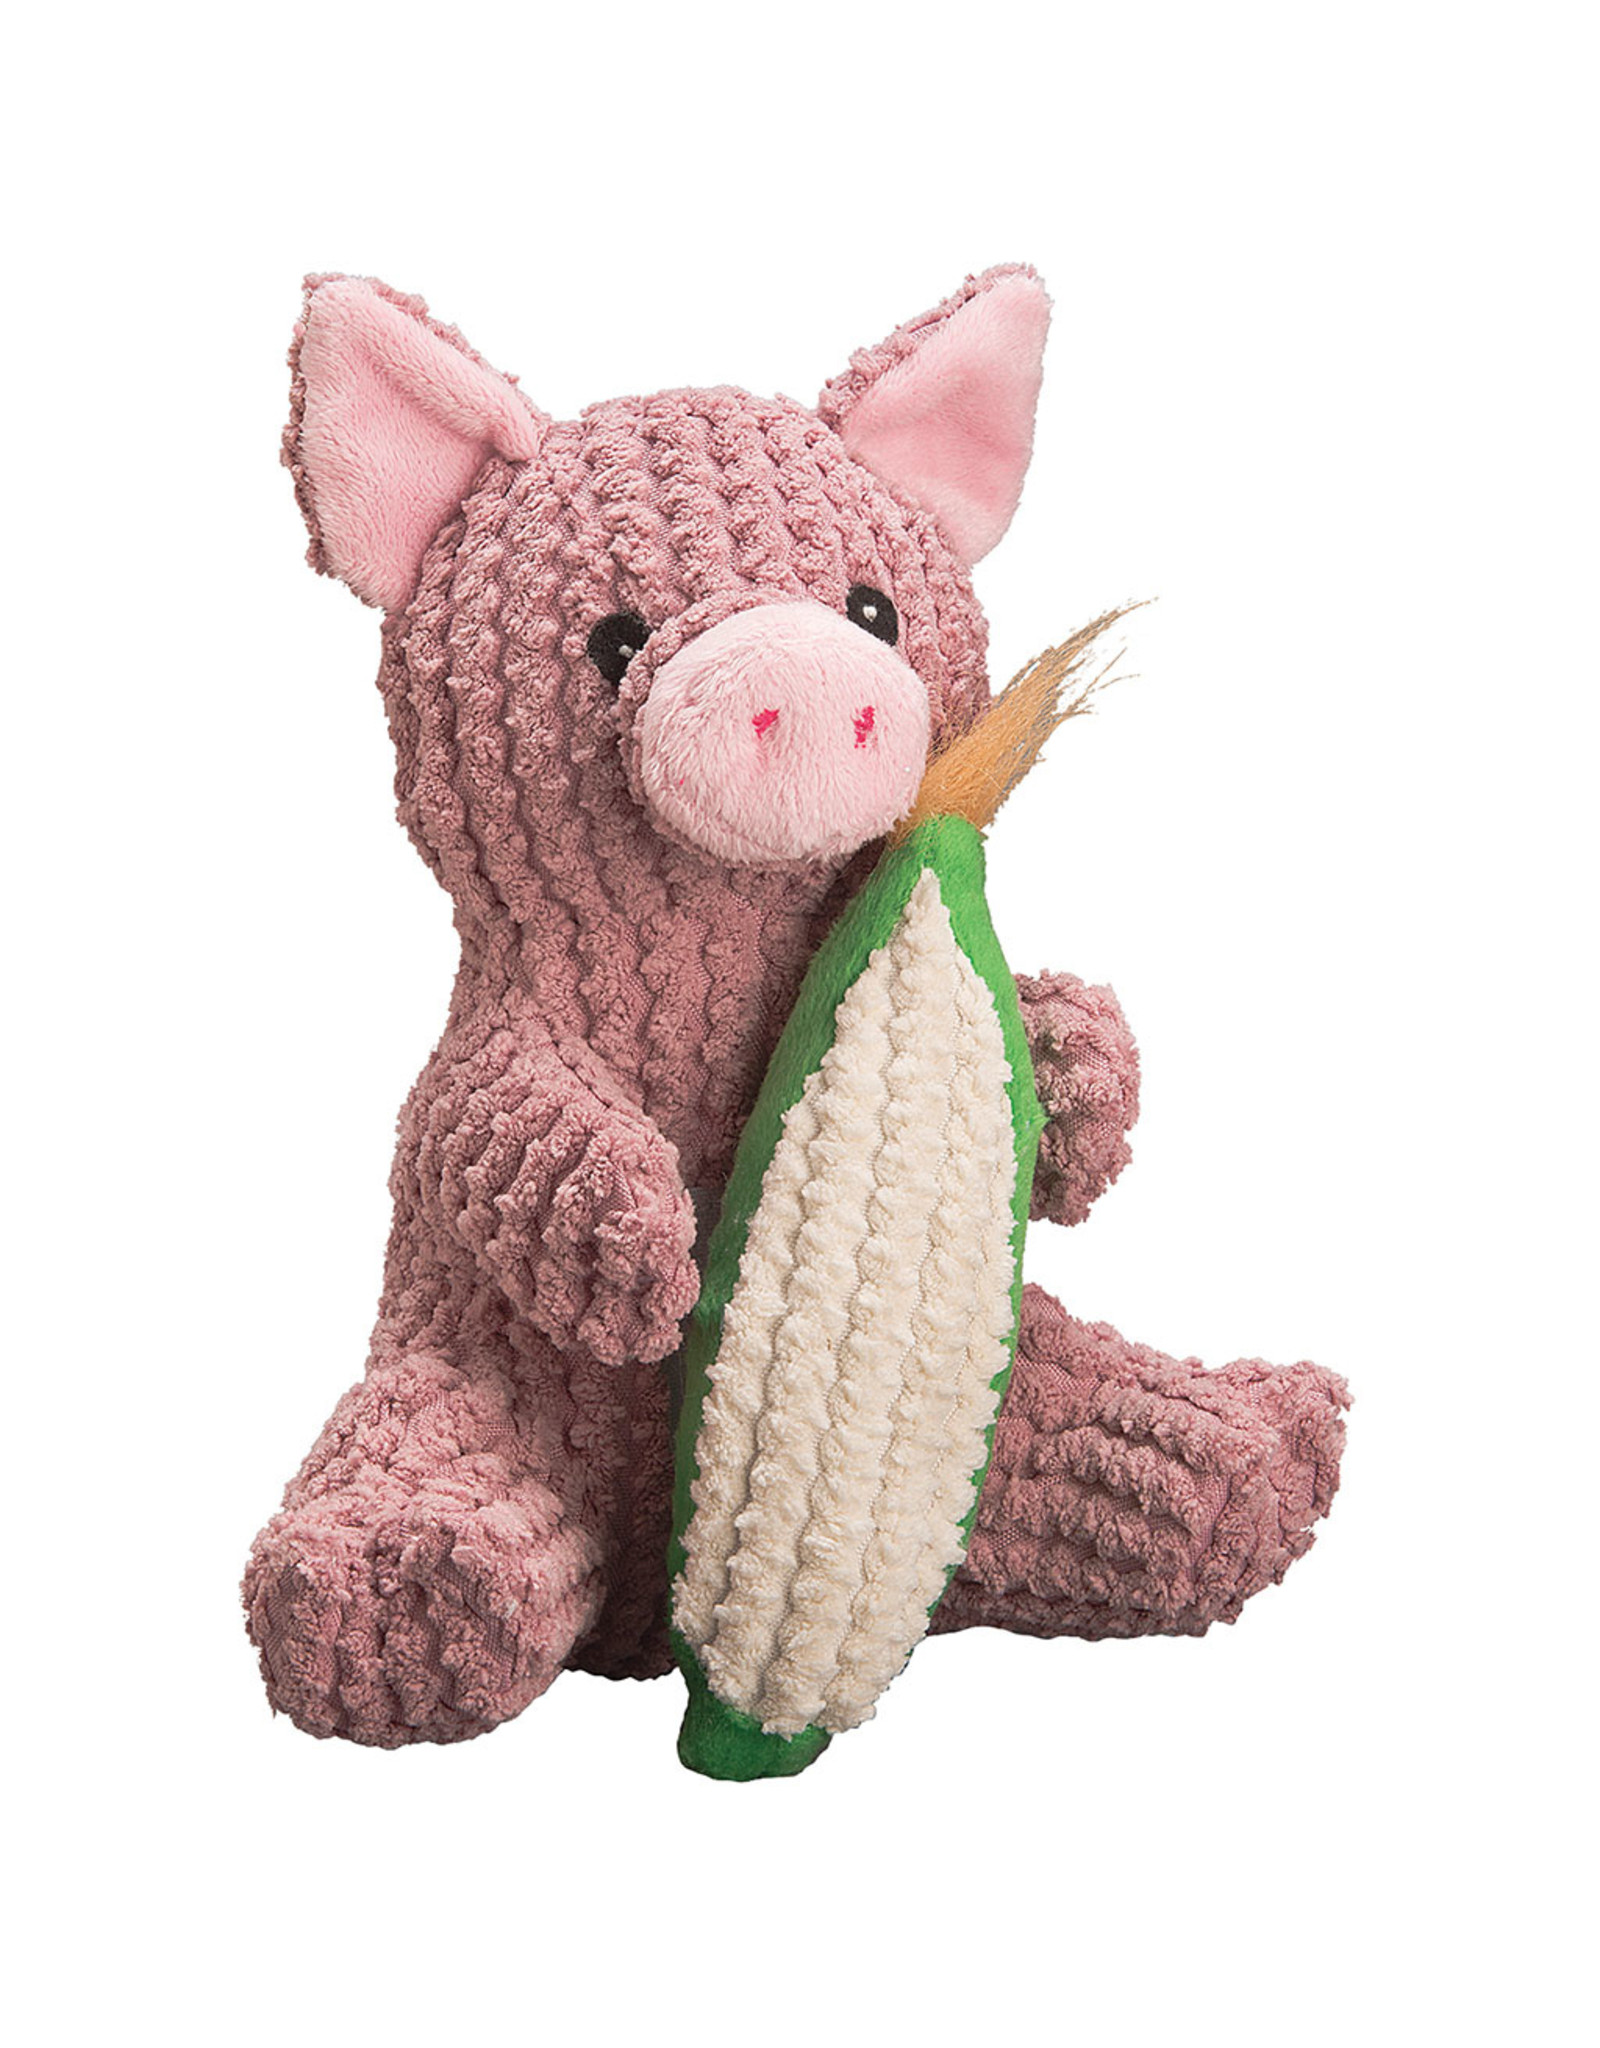 Patchwork Maizey The Pig 10